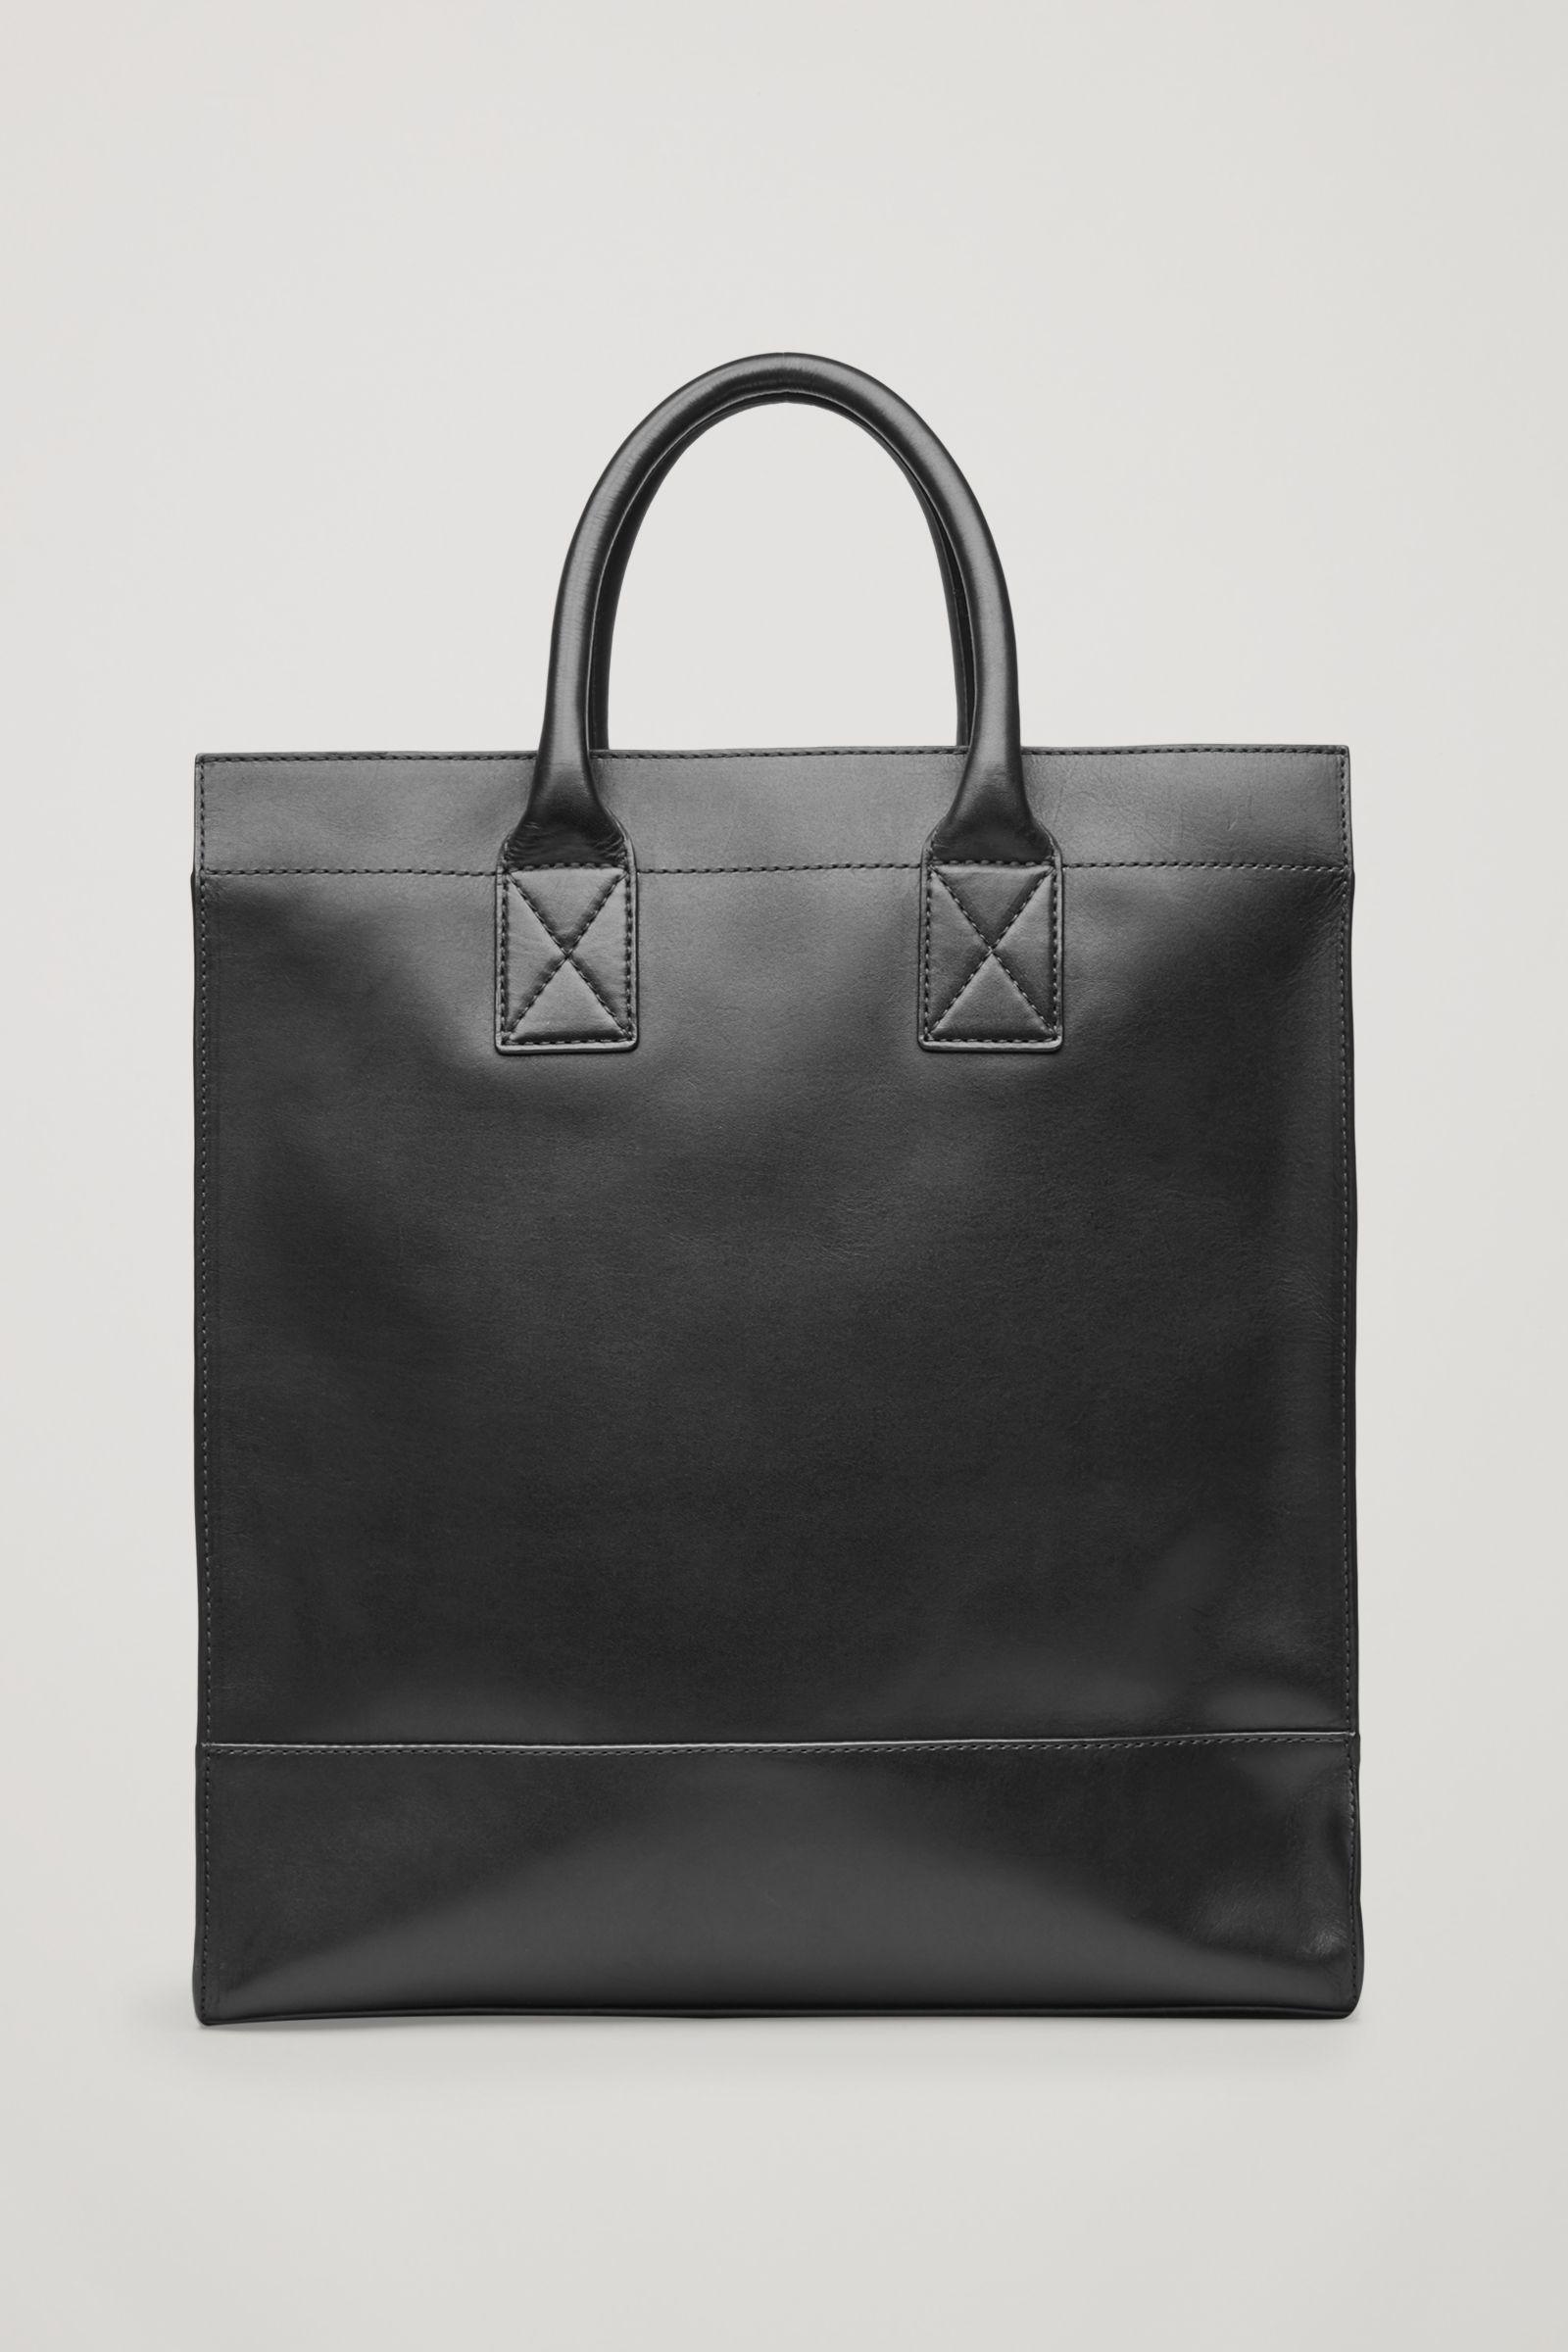 COS Leather Tote Bag in Black for Men - Lyst